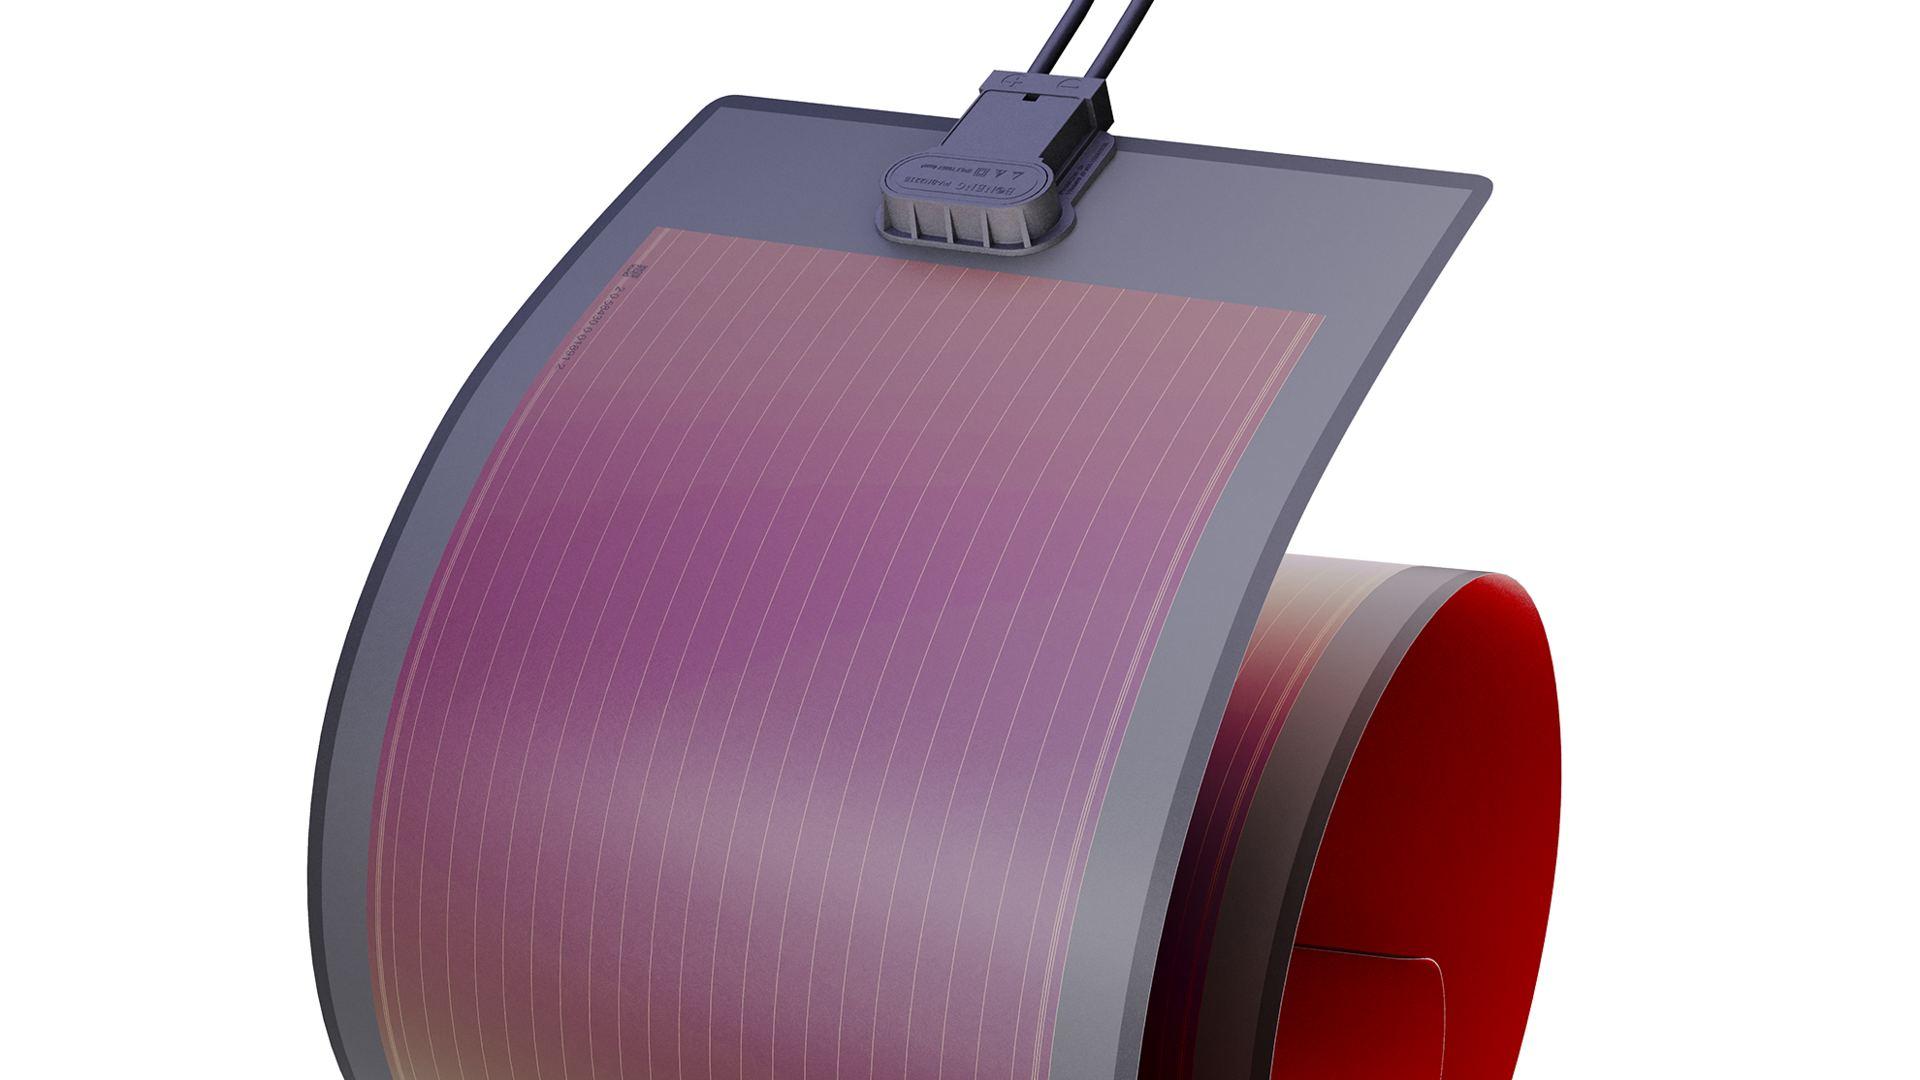 A new generation of HeliaSol solar films with IEC 61215 certification